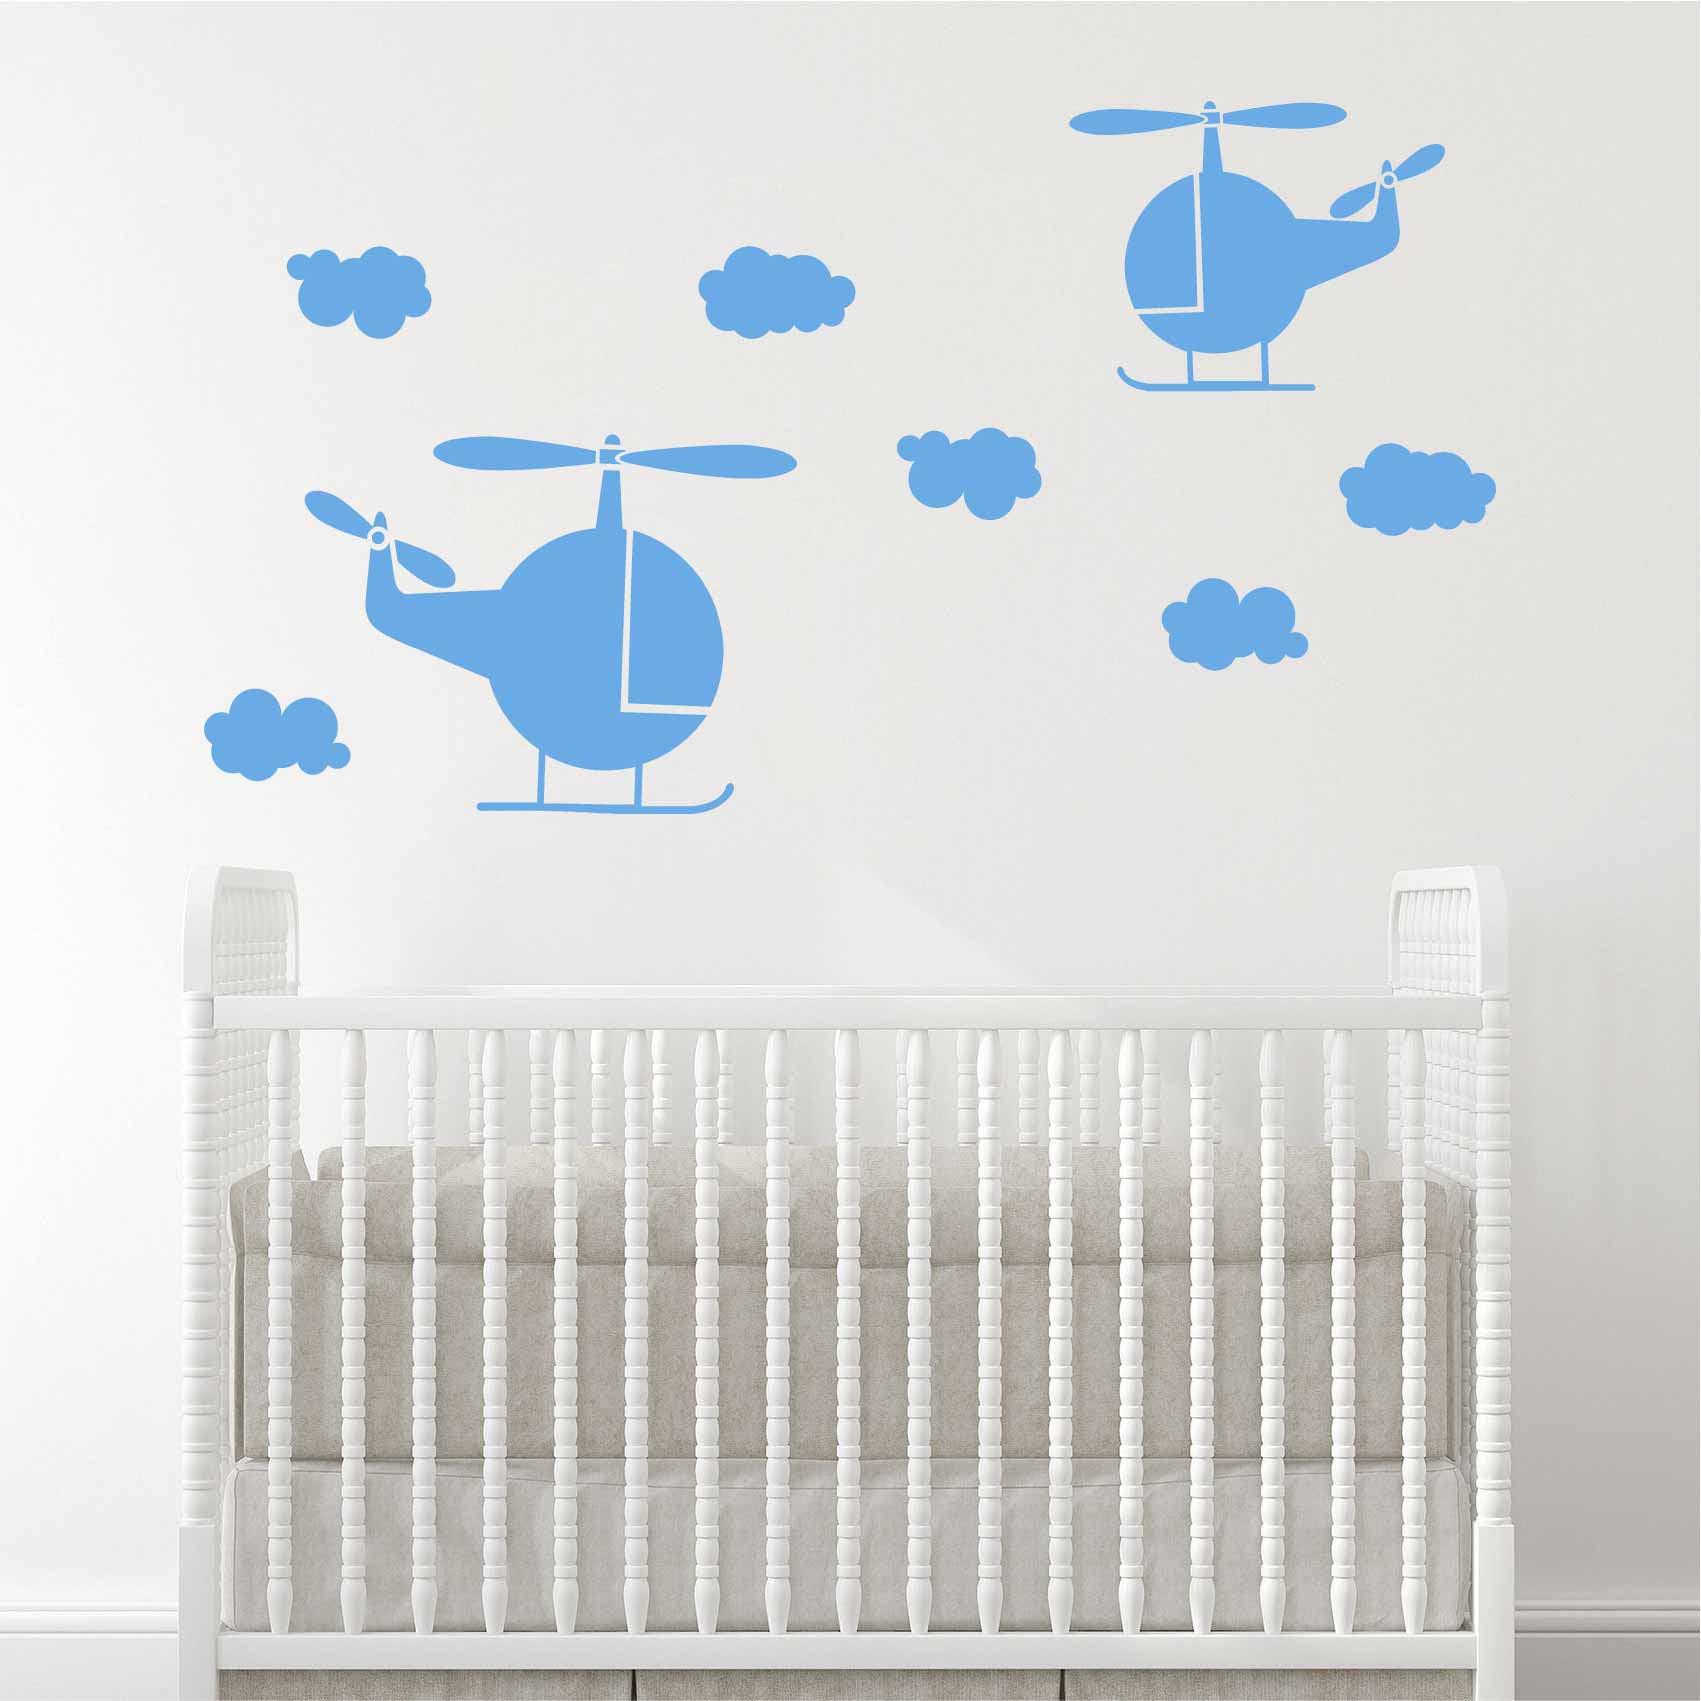 stickers-helicoptere-chambre-enfant-ref7helicoptere-stickers-muraux-helicoptere-autocollant-deco-chambre-enfant-sticker-mural-hélicoptère